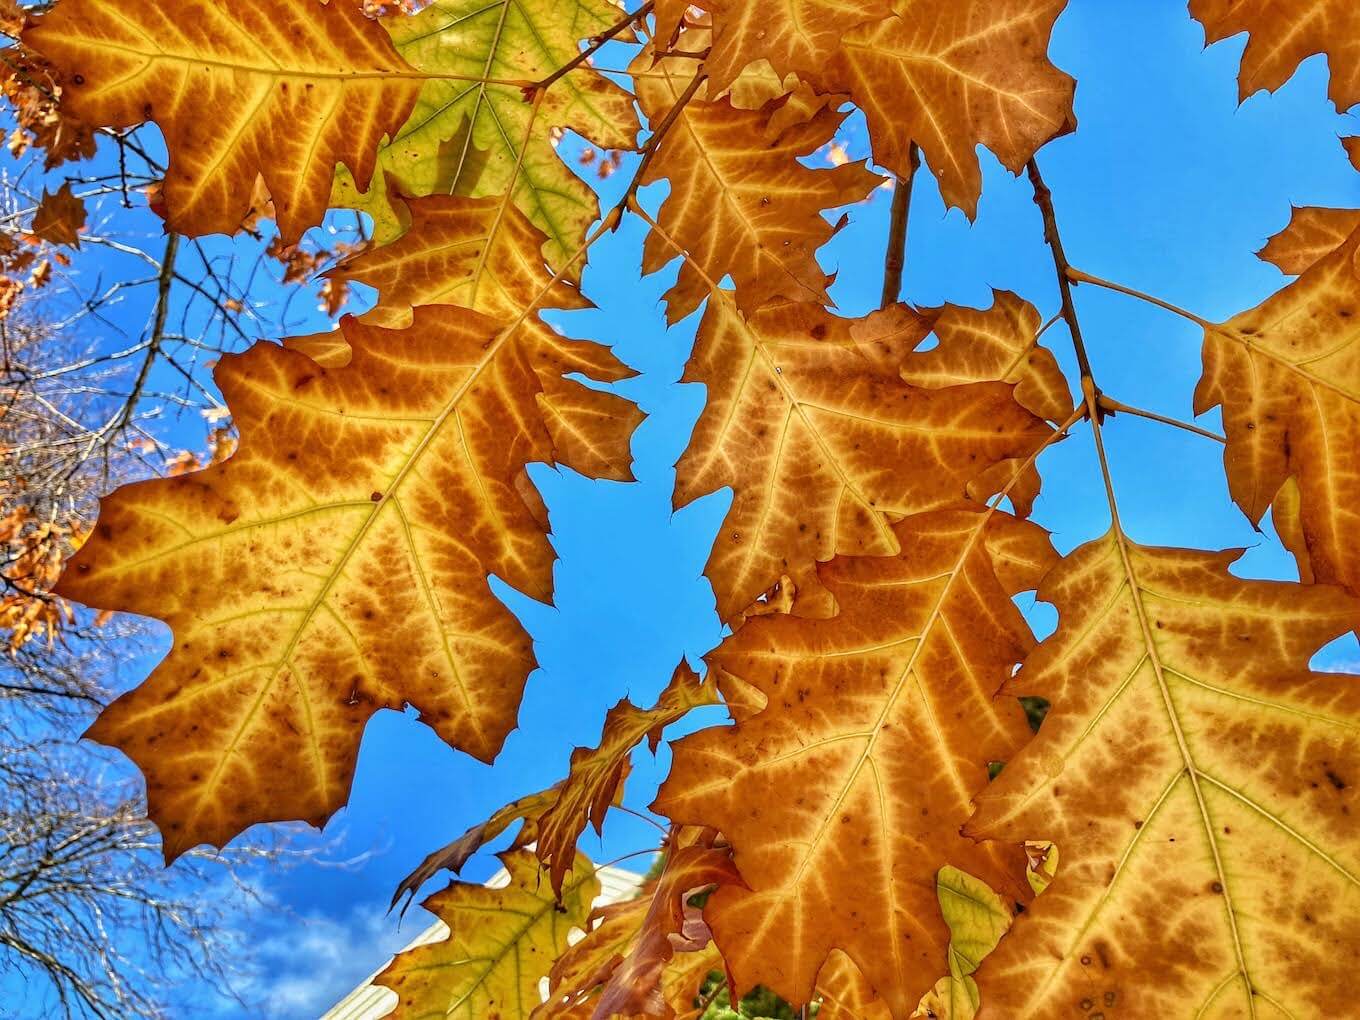 Oak leaves in nature to demonstrate patterns in abstract nature photography.